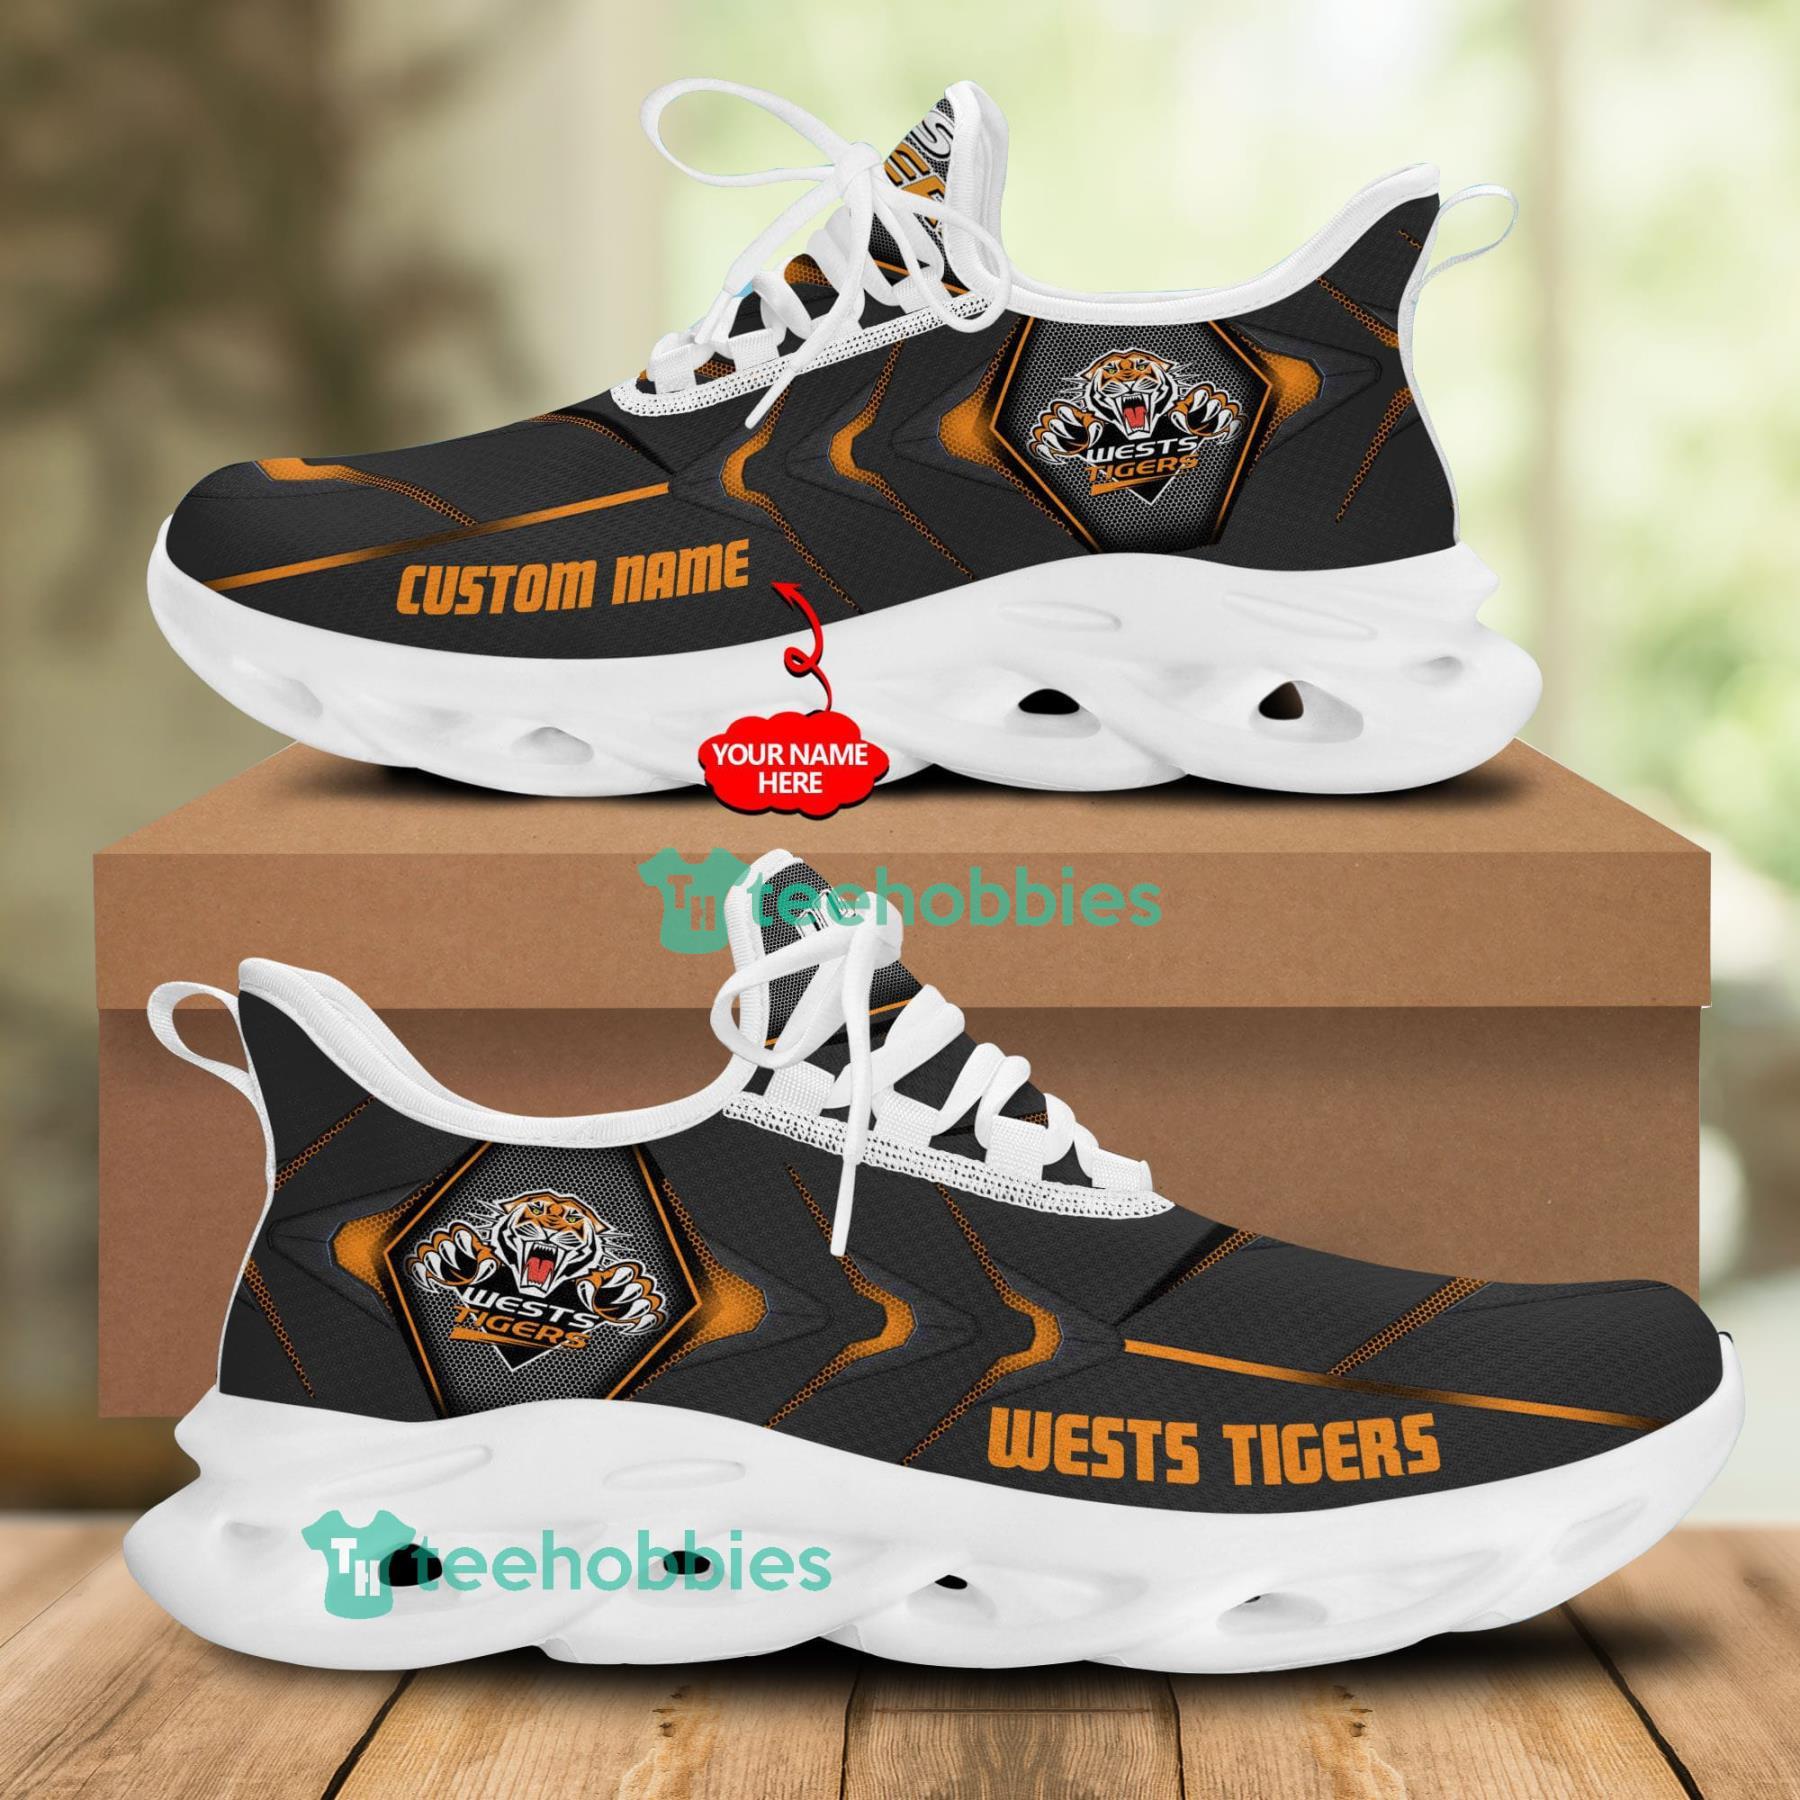 Wests Tigers NRL Custom Name Sneakers Max Soul Shoes For Men And Women Product Photo 1